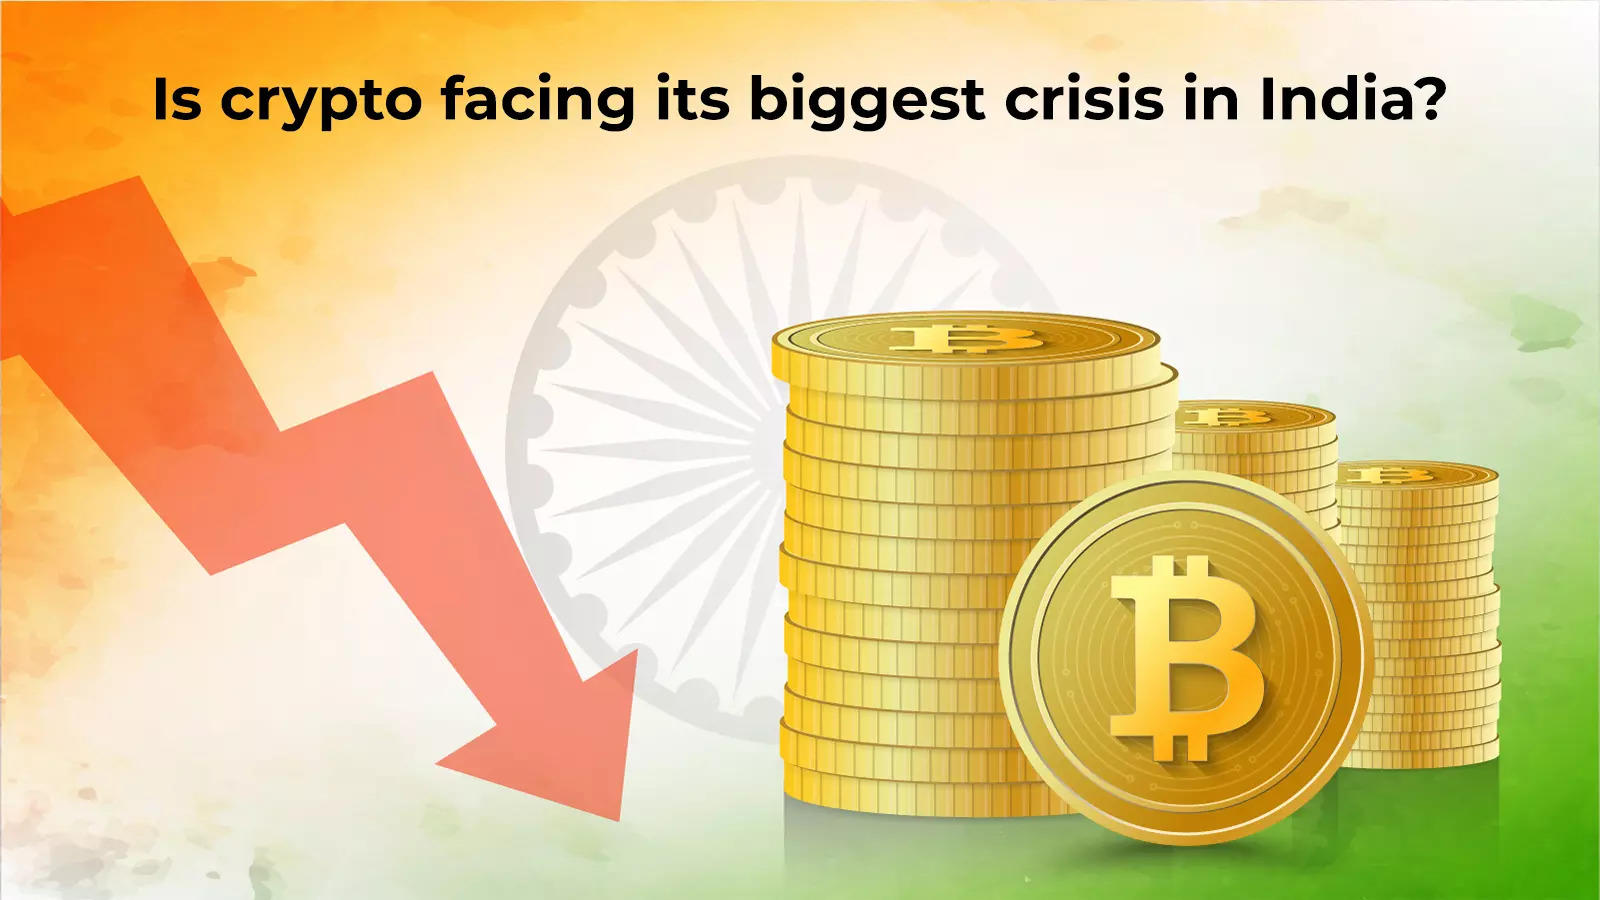 The reason India has almost given up crypto trading - Times of India